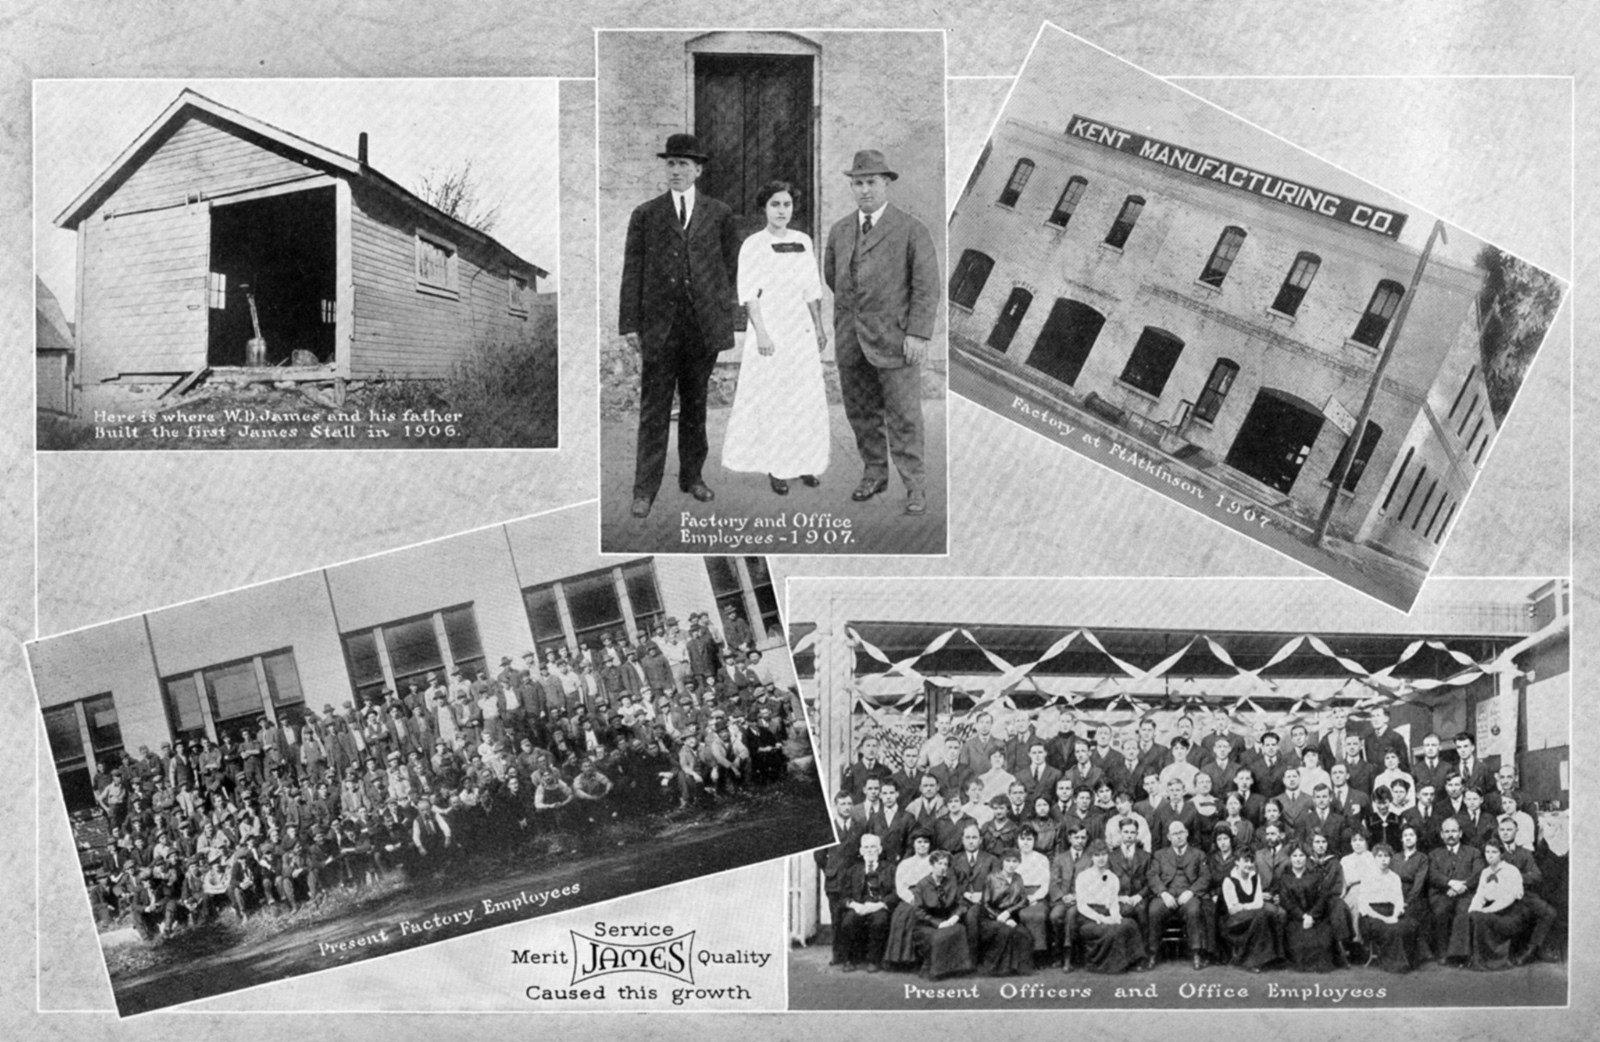 A composite of images from the 1916 James Manufacturing Company catalog.